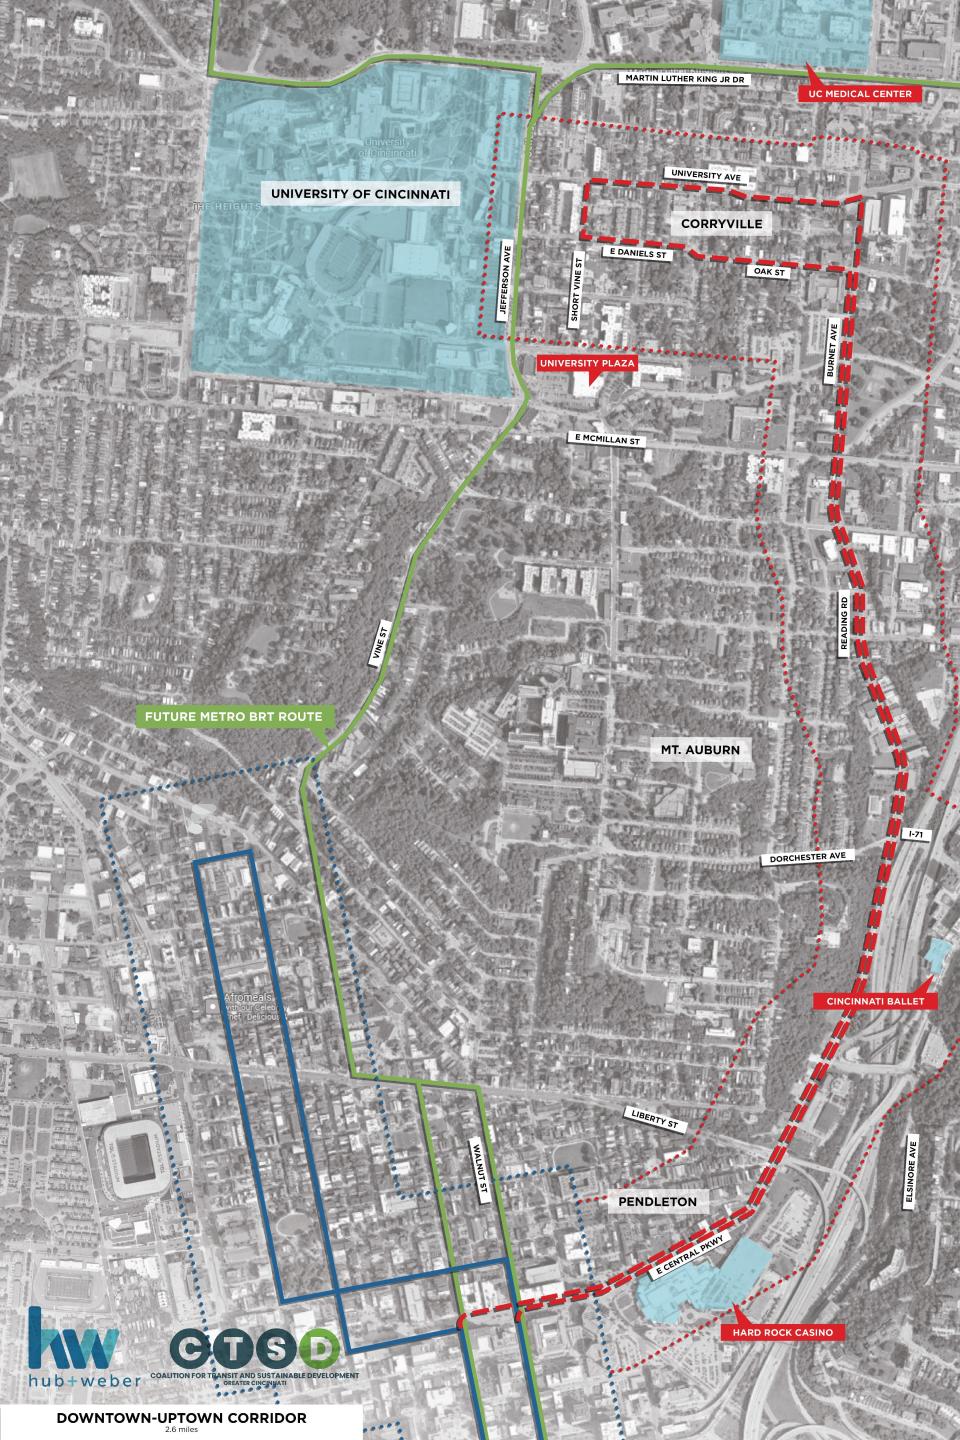 The Downtown-to-Uptown route, at 2.6 miles, would travel Reading Road to Corryville.